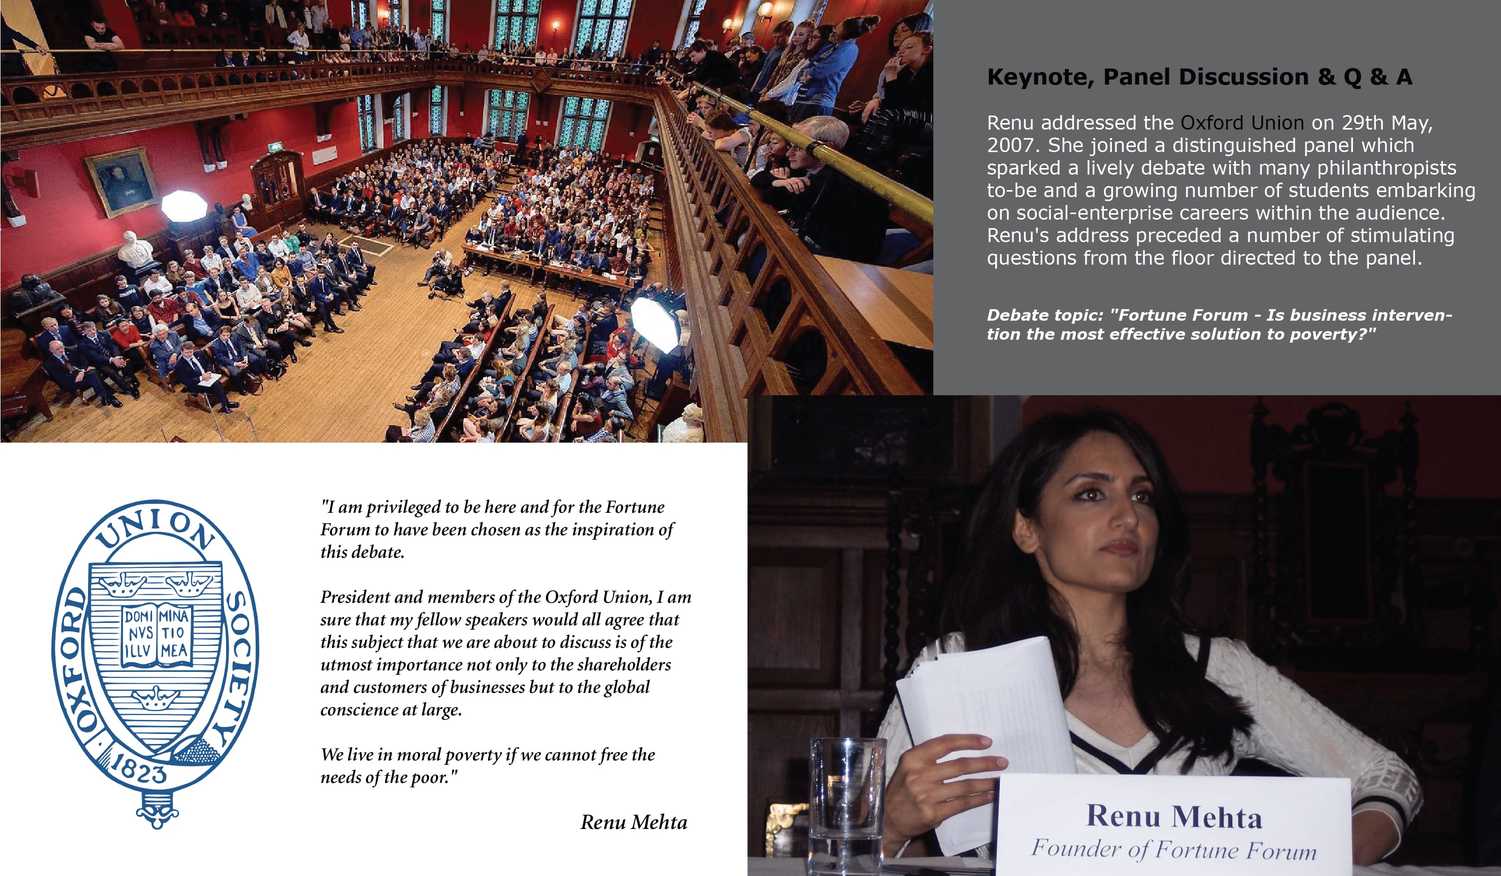 Renu Mehta speaking at the Oxford Union about sustainability